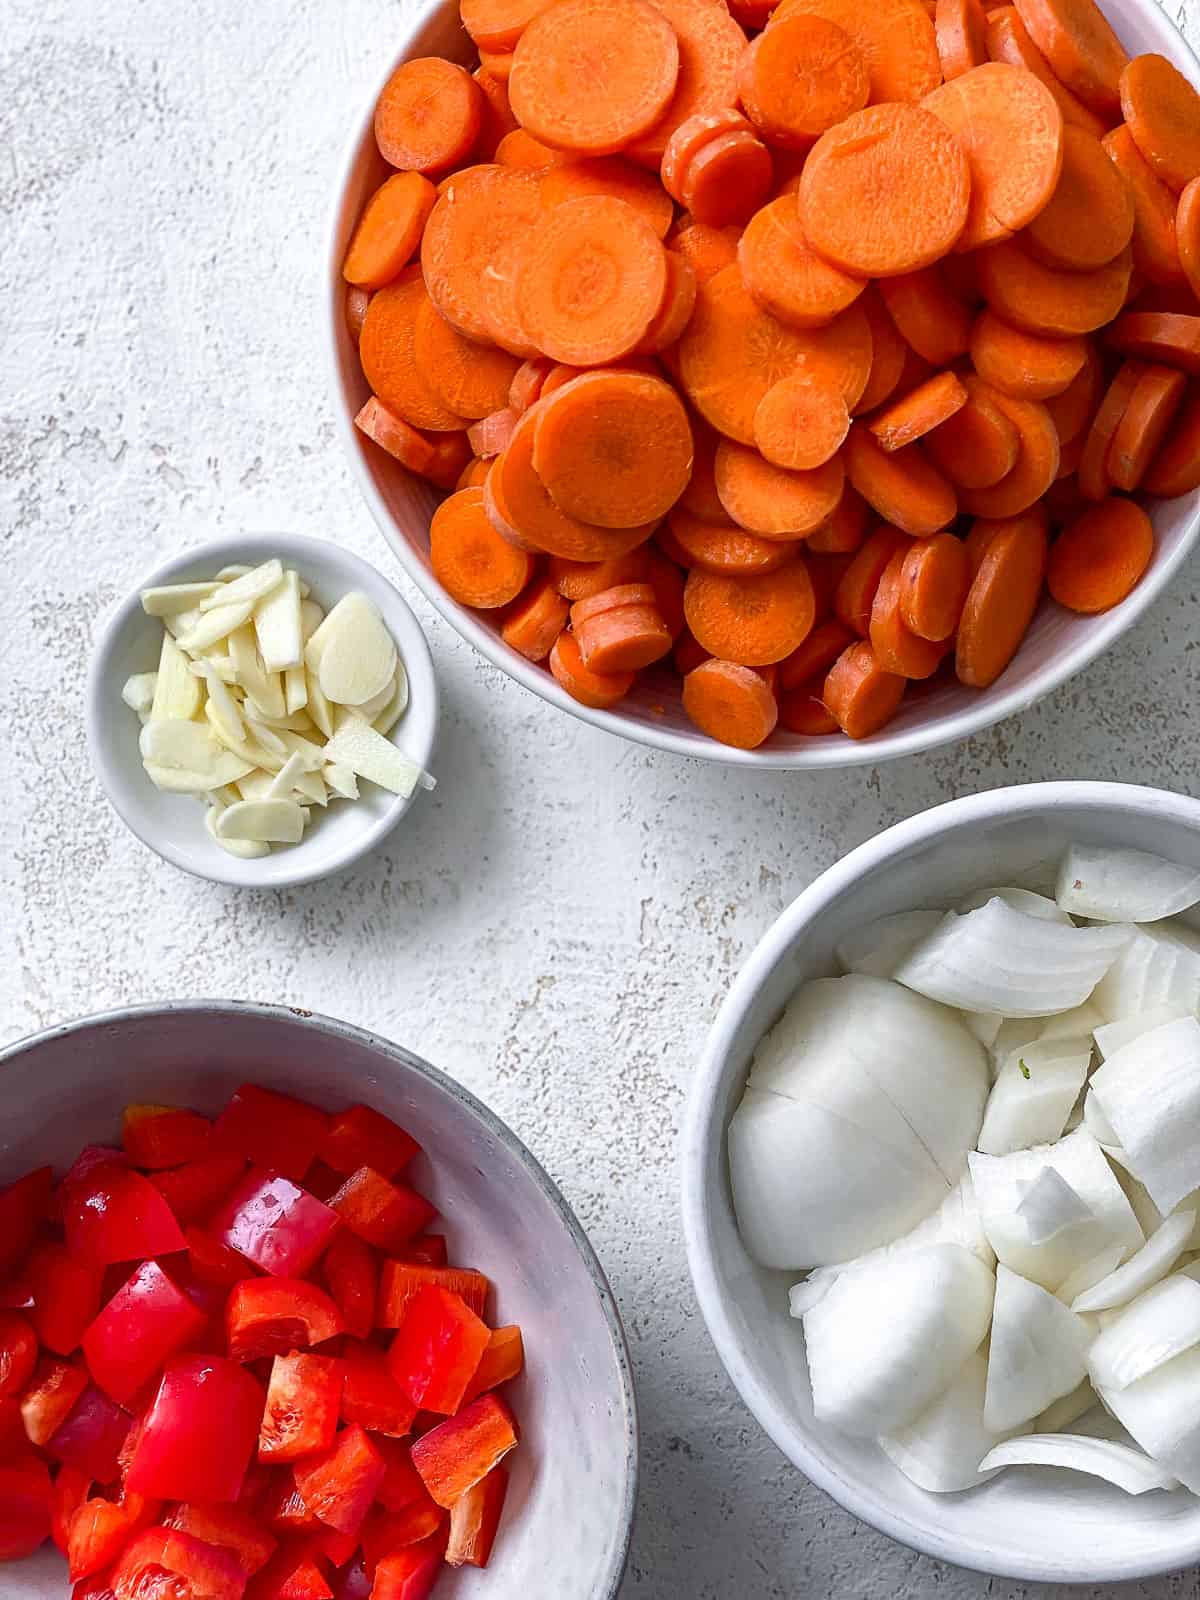 ingredients for Creamy Chickpea and Carrot Curry measured out against a white surface